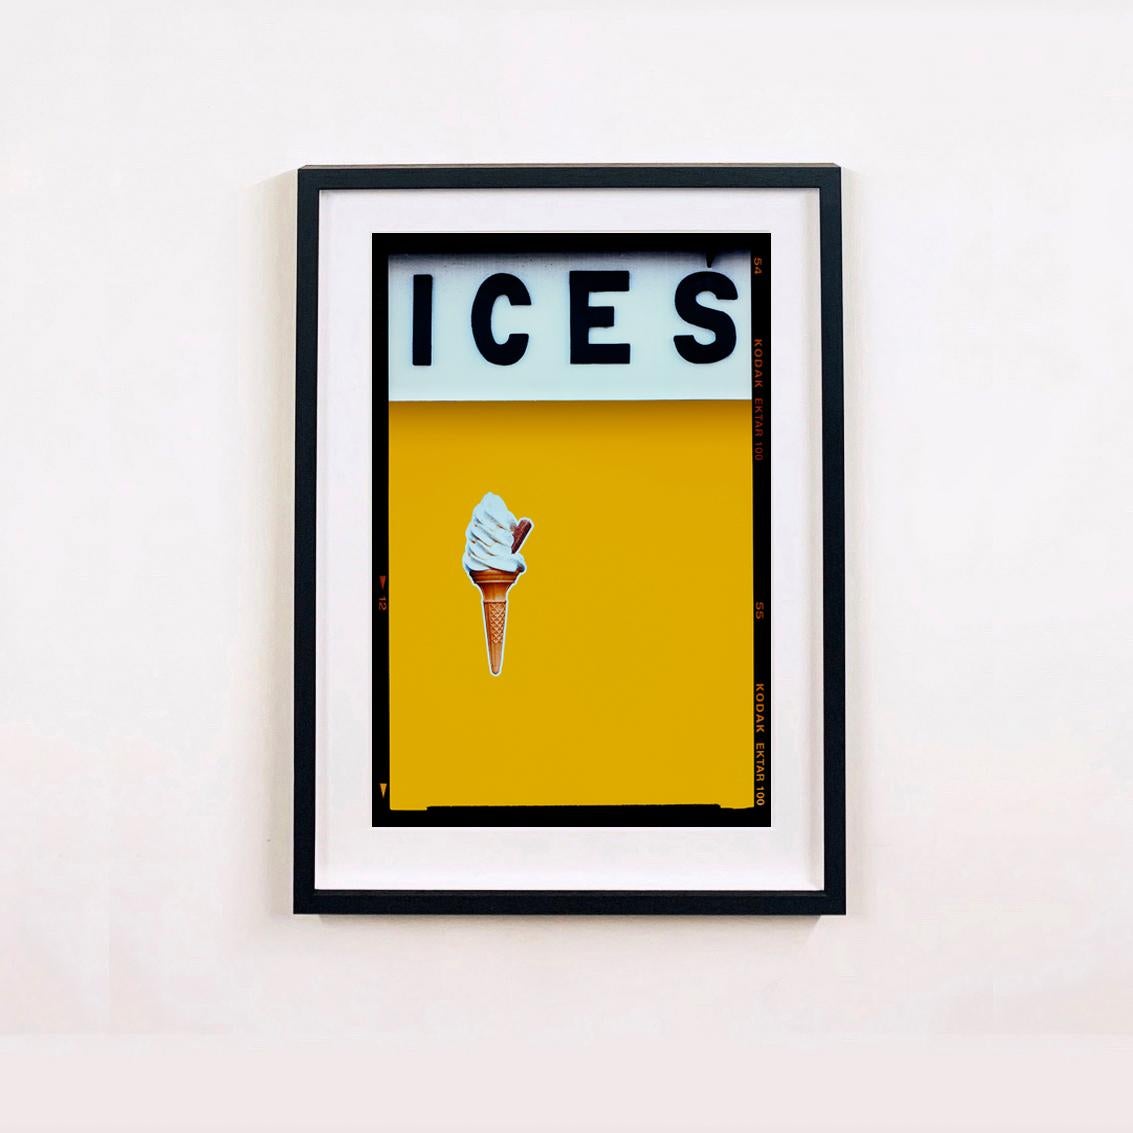 Ices (Mustard Yellow), Bexhill-on-Sea - British Pop Art Color Photography For Sale 1